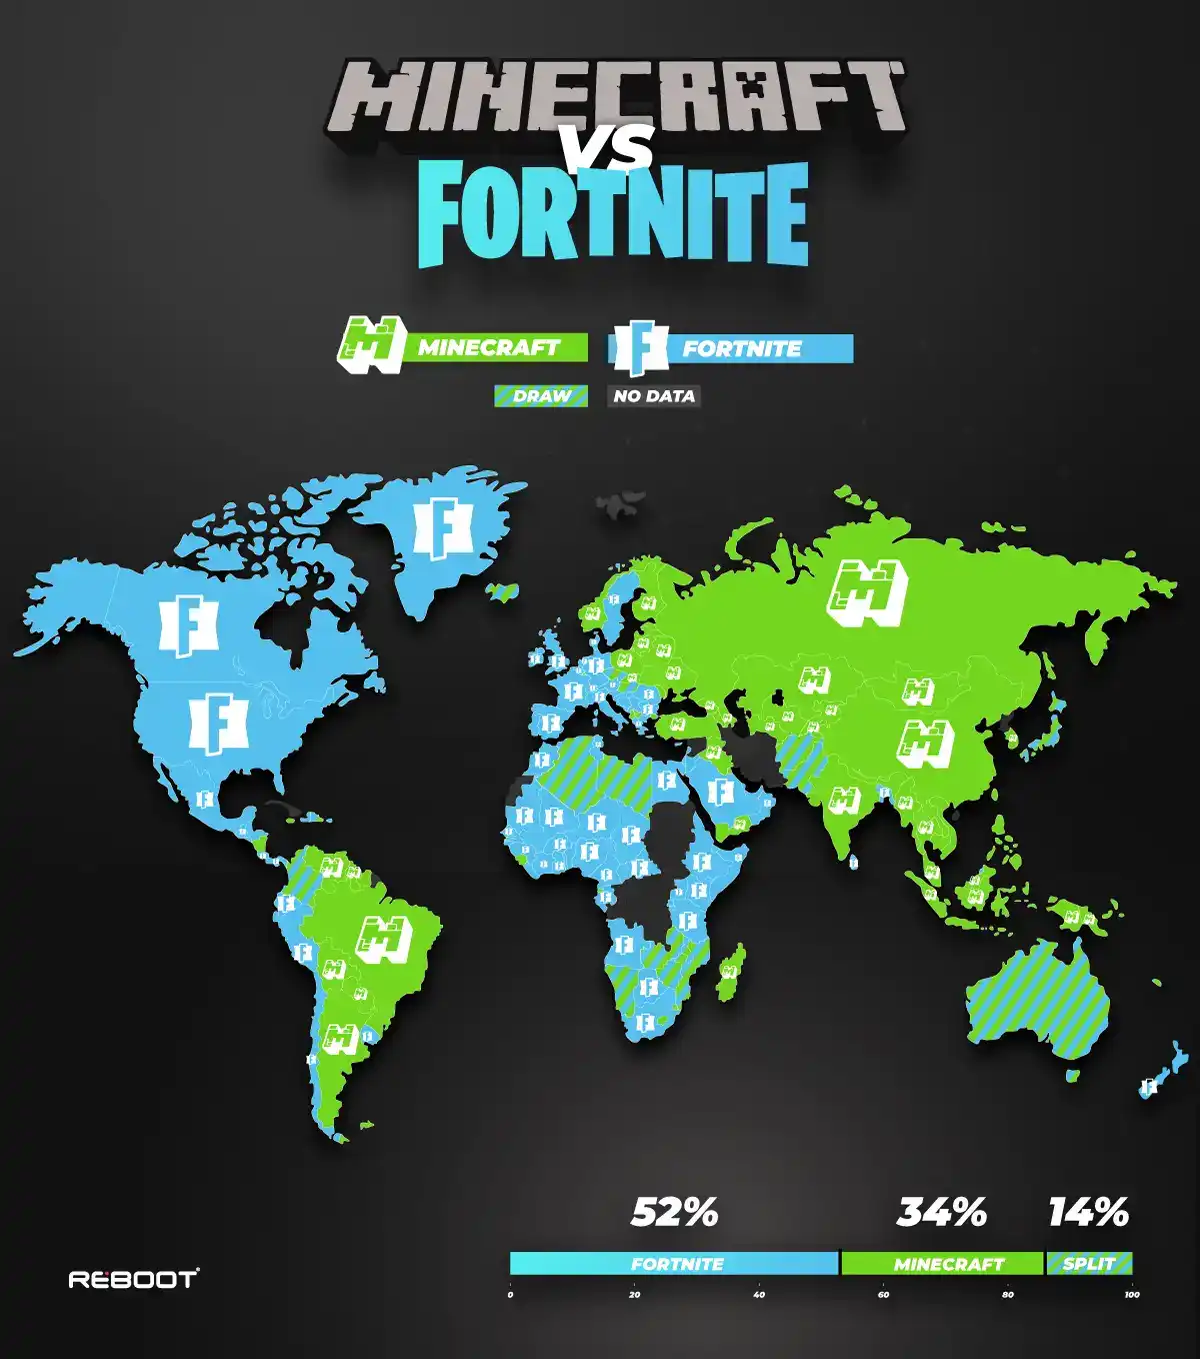 Minecraft map is officially eighteen times bigger than the Earth